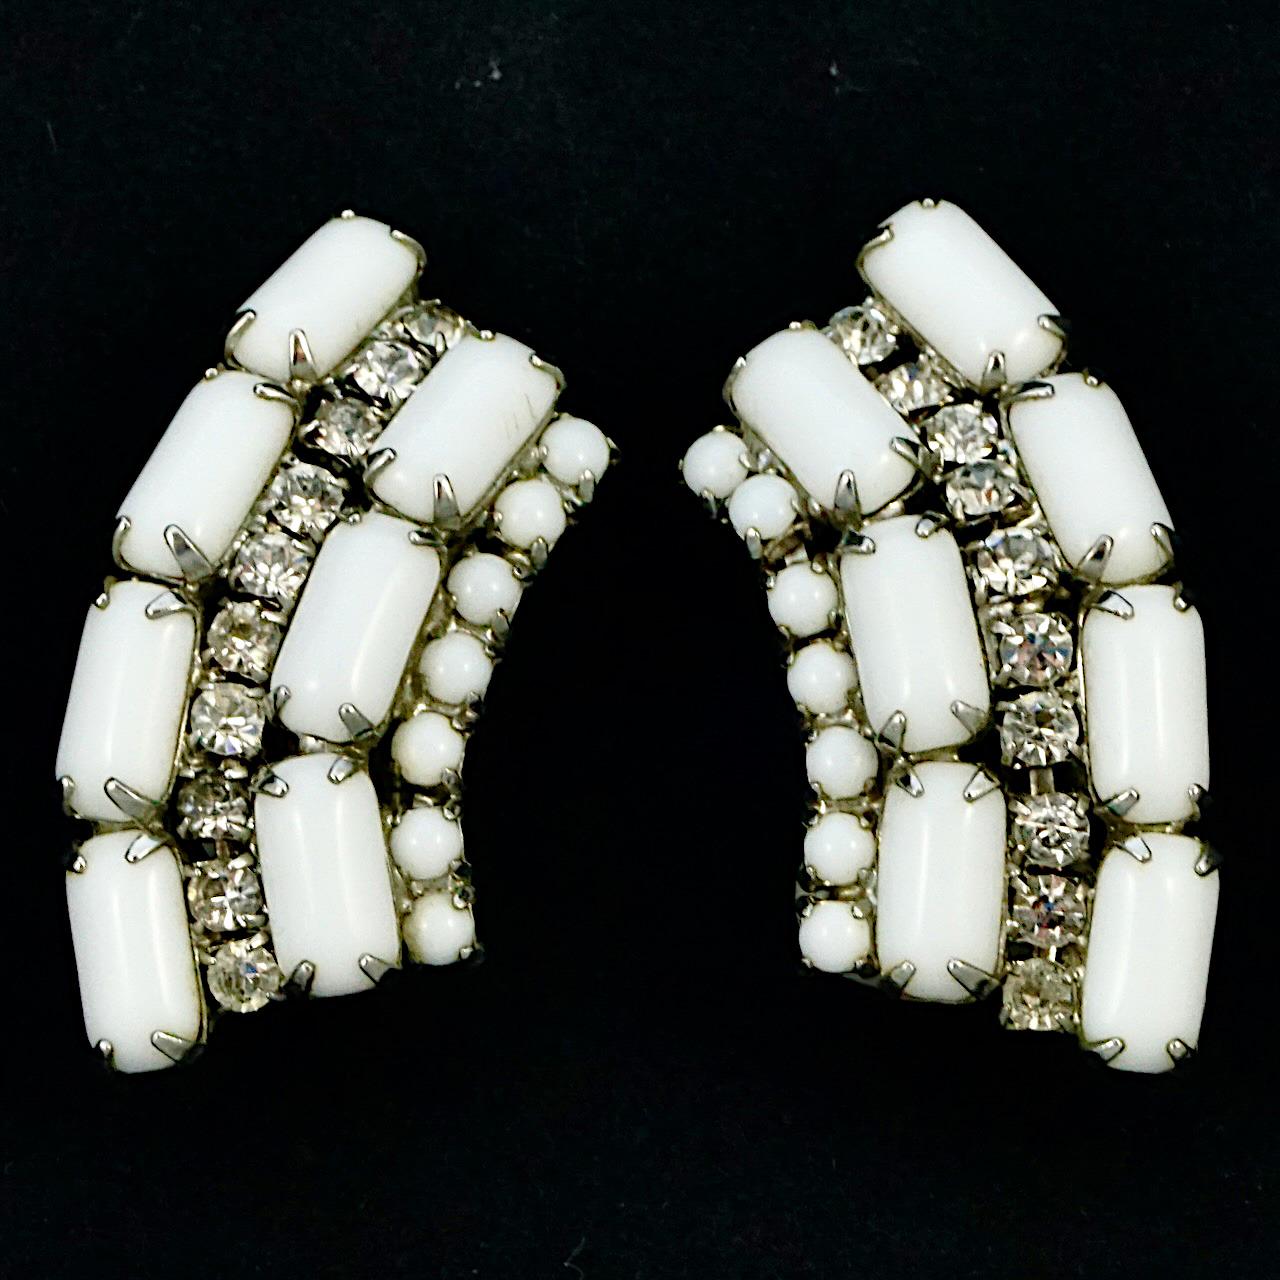 Silver Tone White Milk Glass and Rhinestone Clip On Climber Earrings circa 1950s For Sale 2